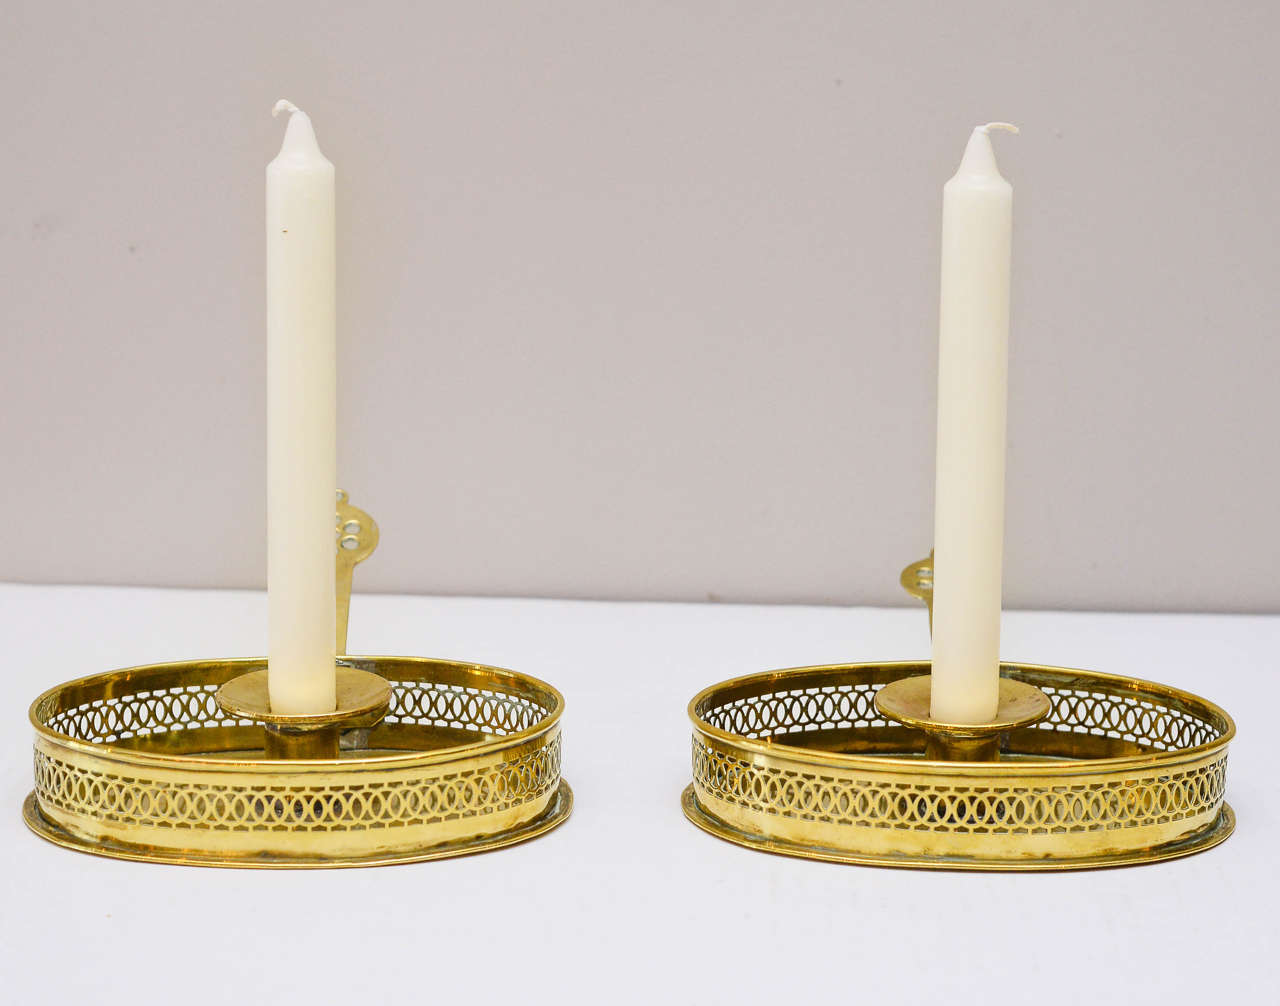 Pair of English pierced brass candle holders, mid-19th century with applied pierced handles